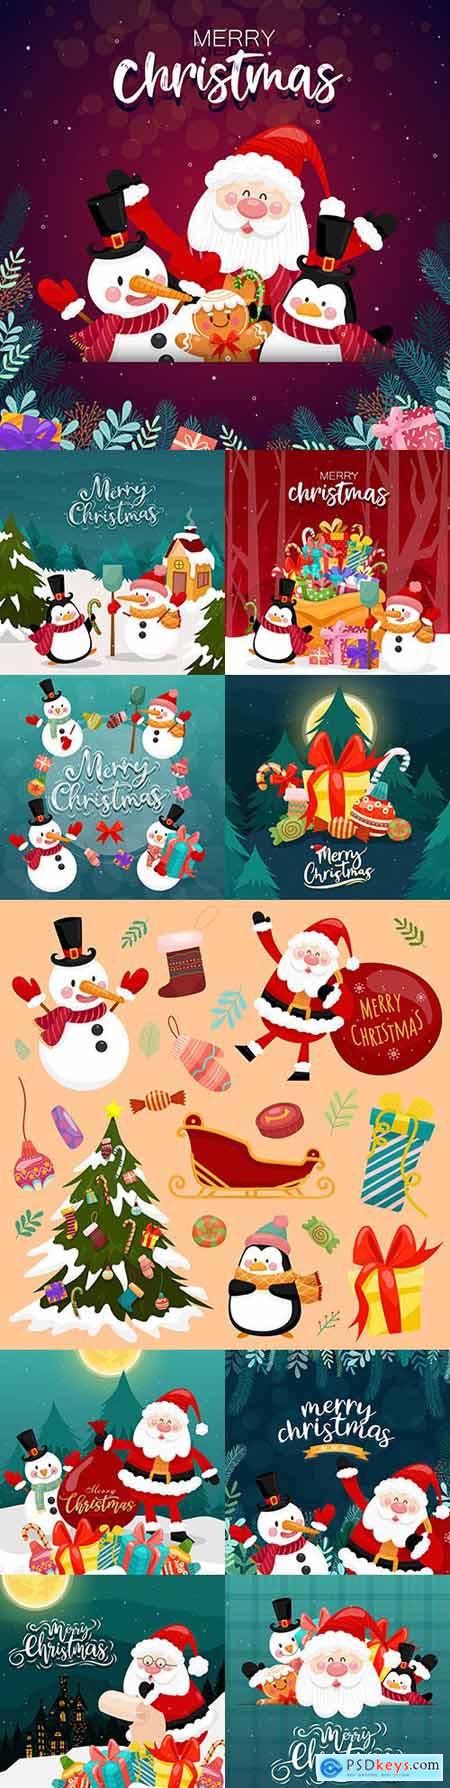 Merry Christmas card with Santa Claus and gift box